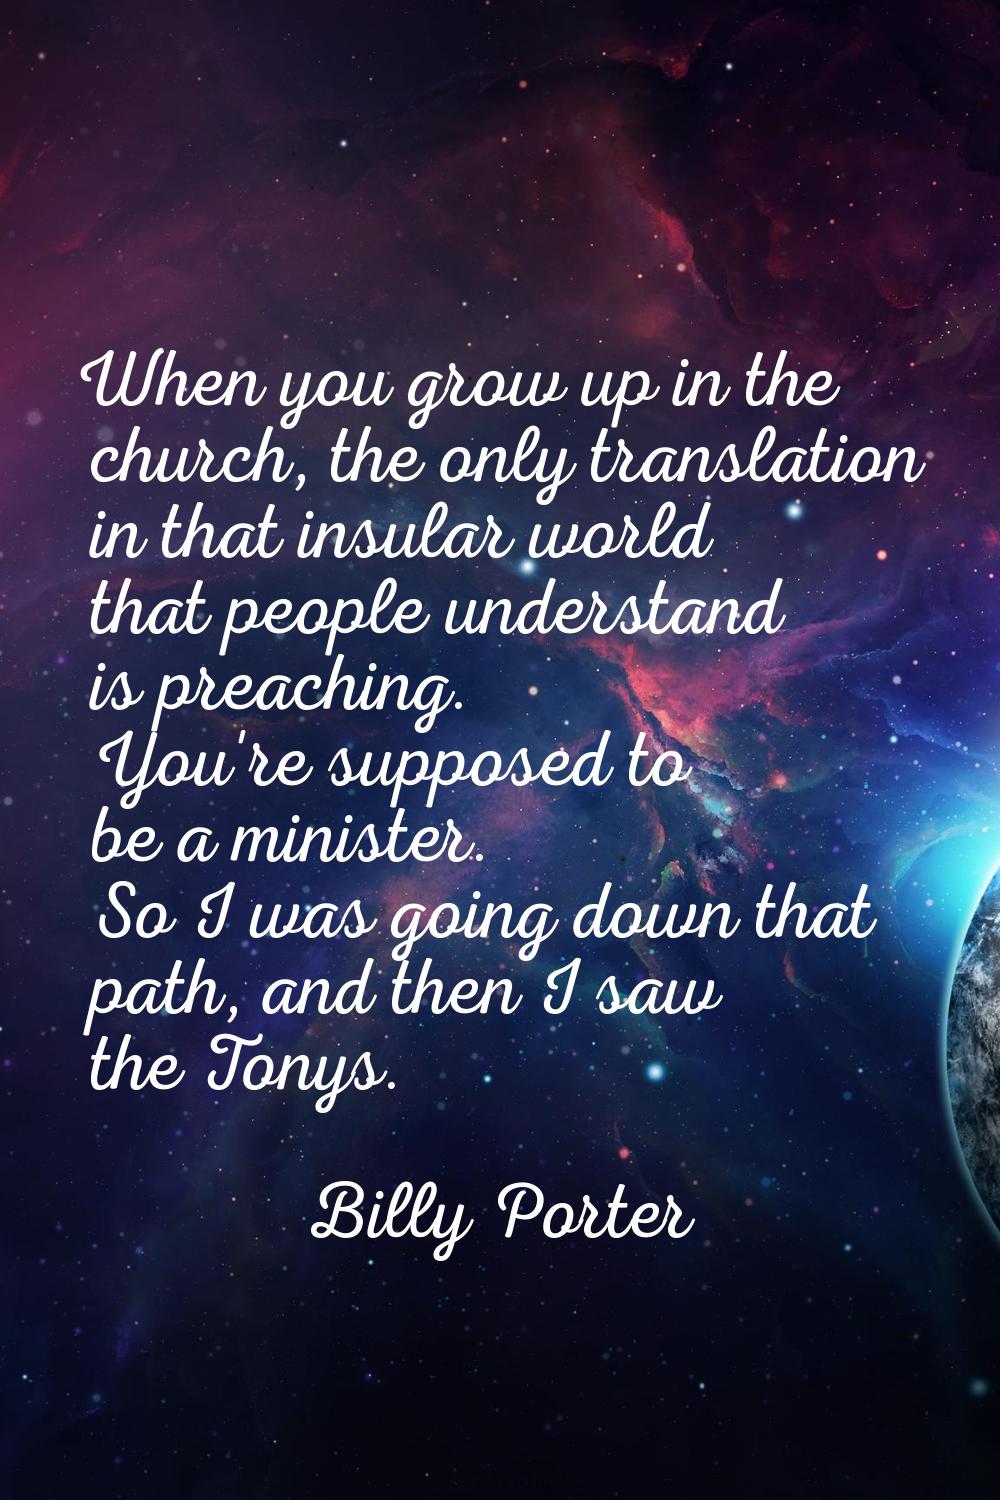 When you grow up in the church, the only translation in that insular world that people understand i